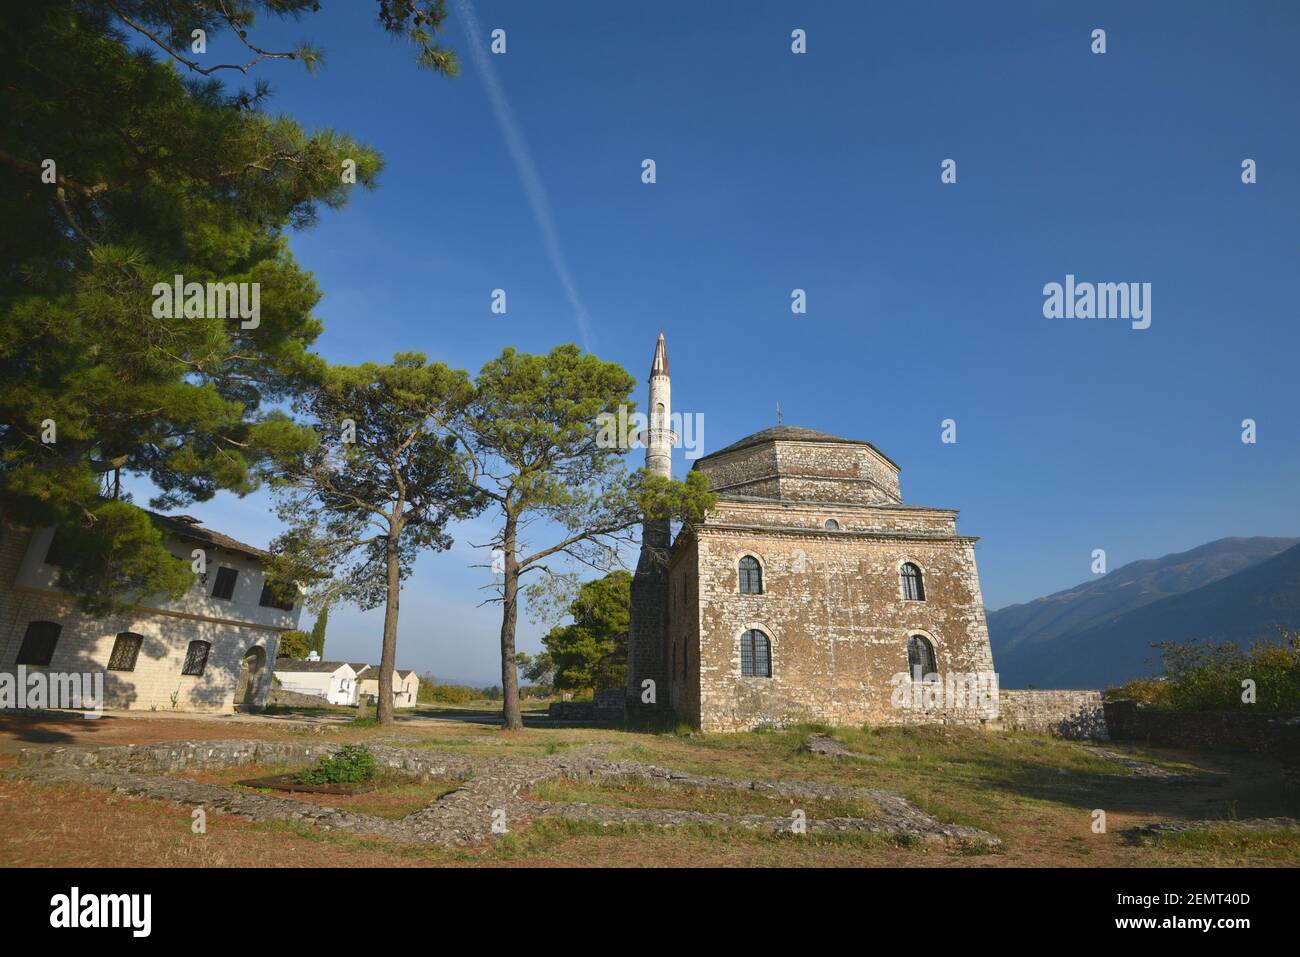 Landscape with panoramic view of the Ottoman style Fethiye Mosque a historic landmark of Ioannina in Epirus, Greece. Stock Photo